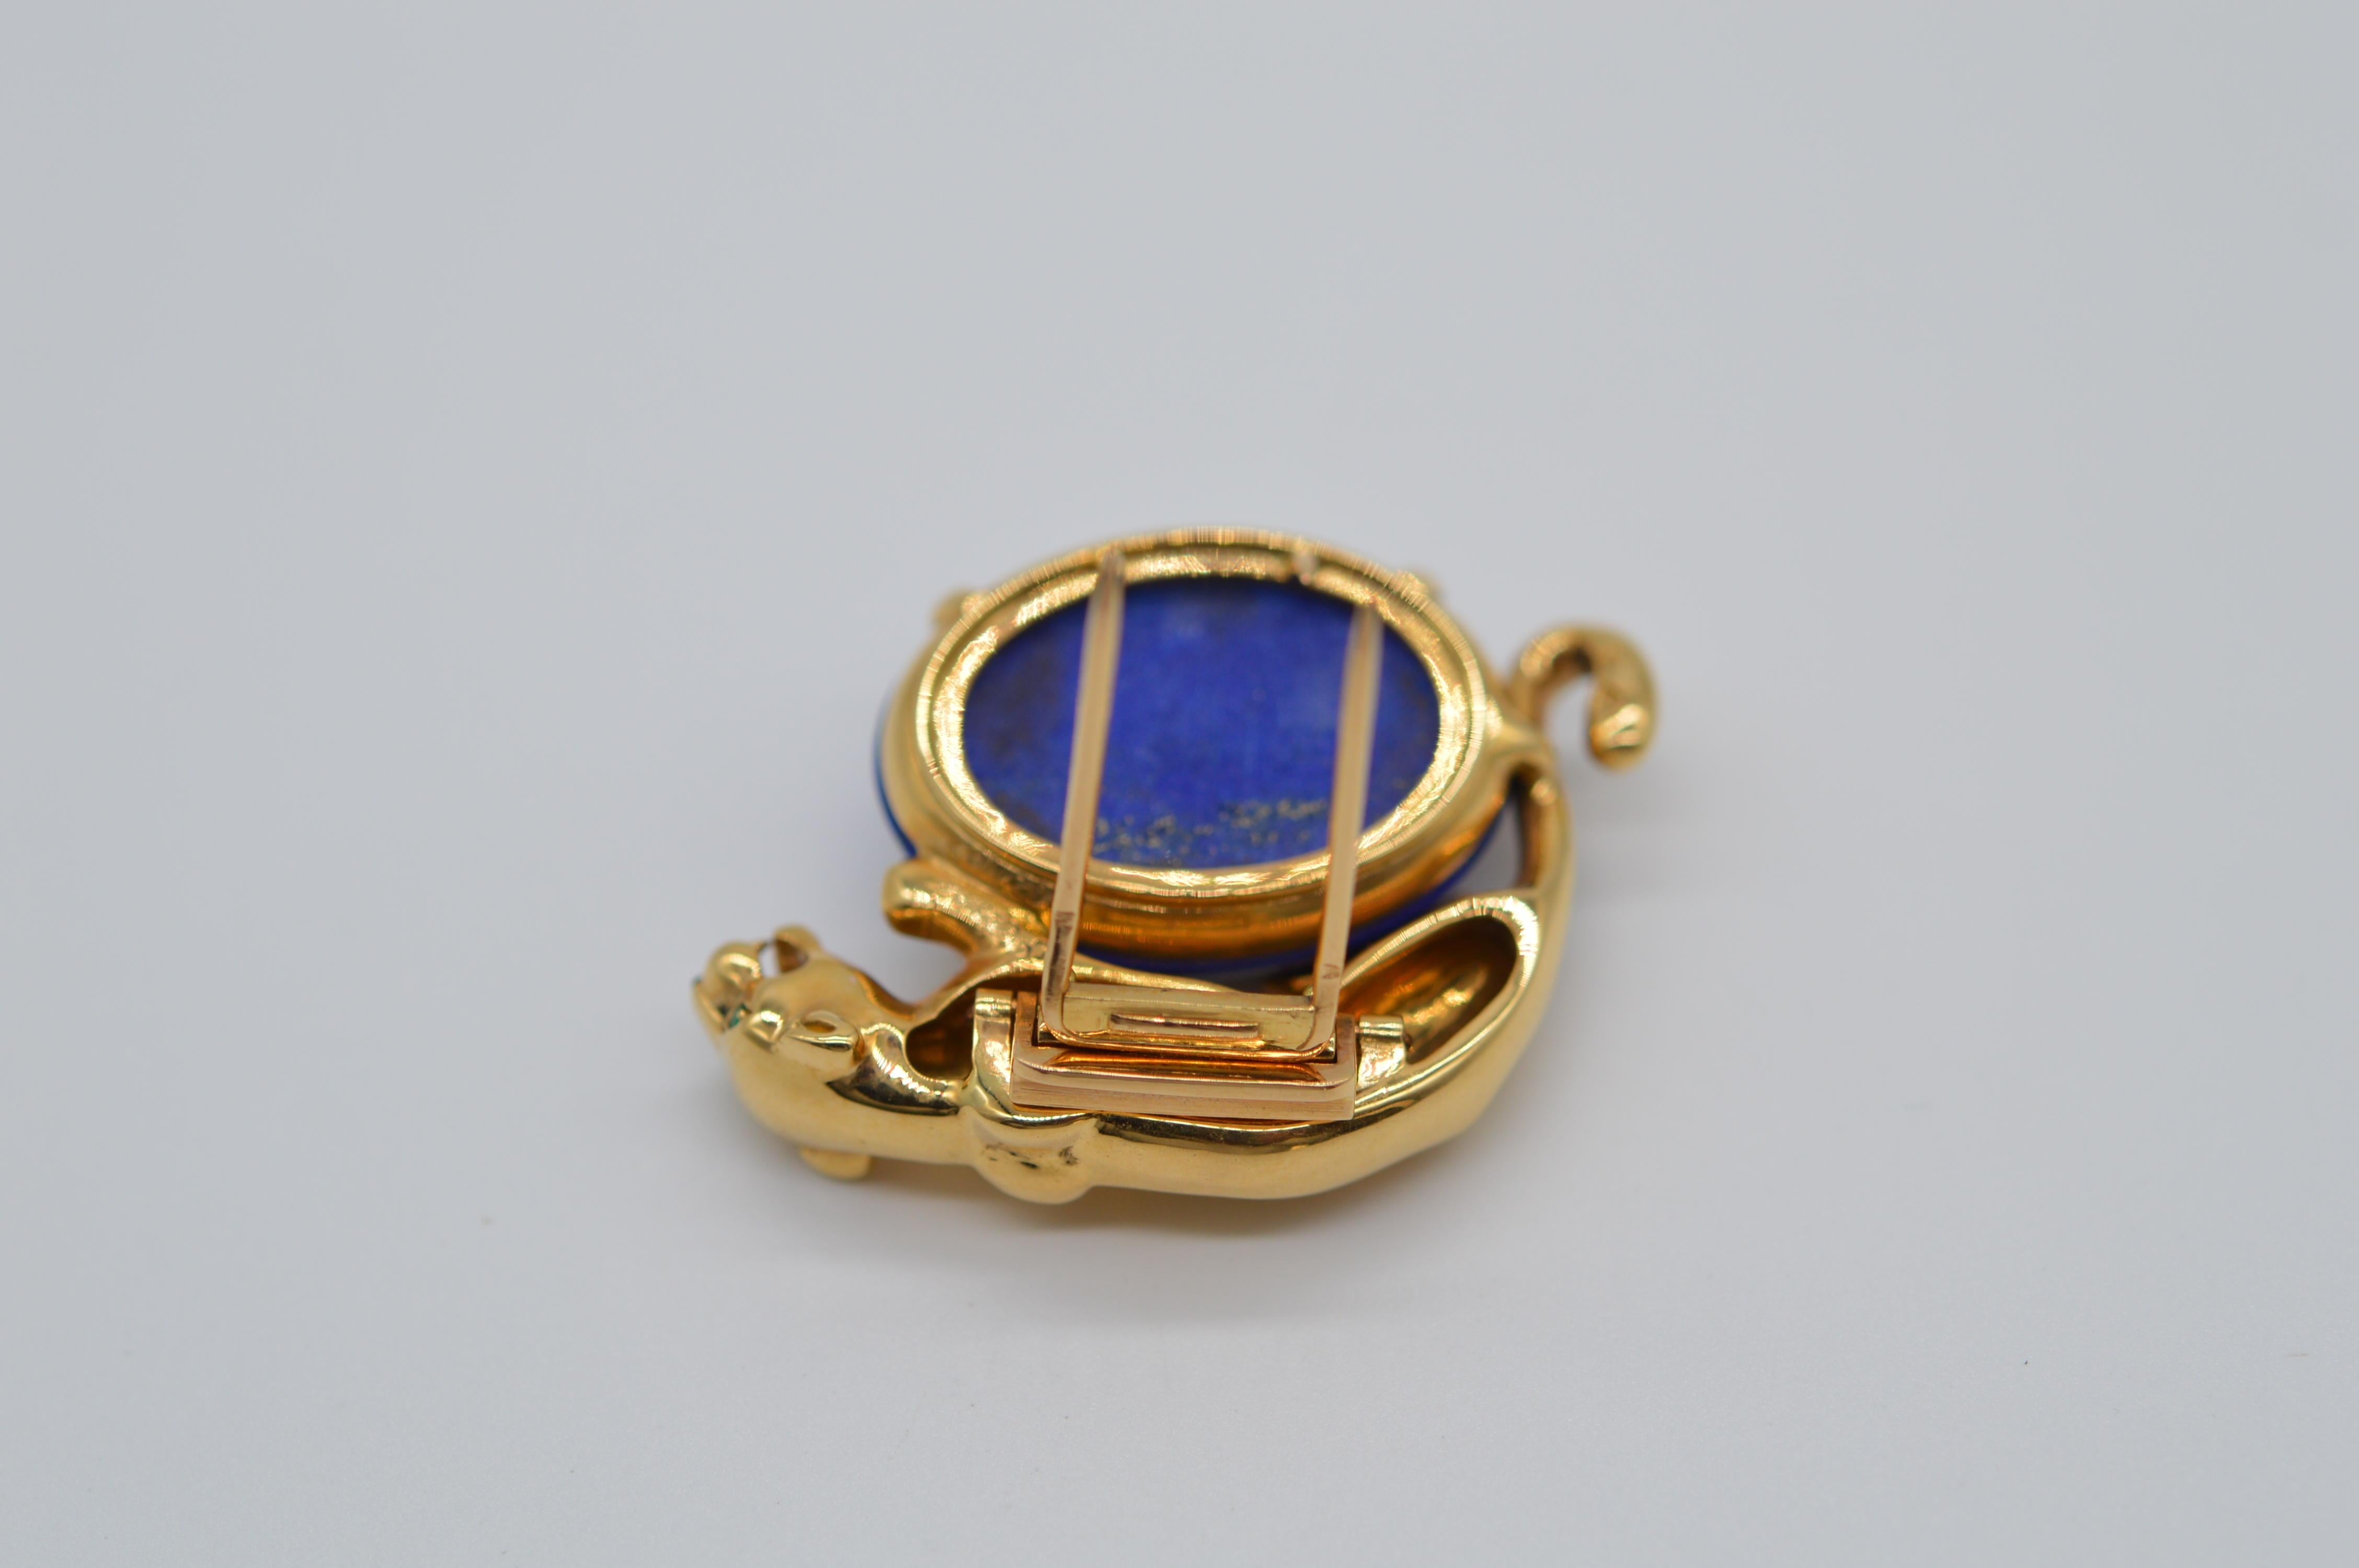 Cartier Panthère Lapis Lazuli 18K Yellow Gold Brooch with Emerald Eyes Unworn For Sale 1